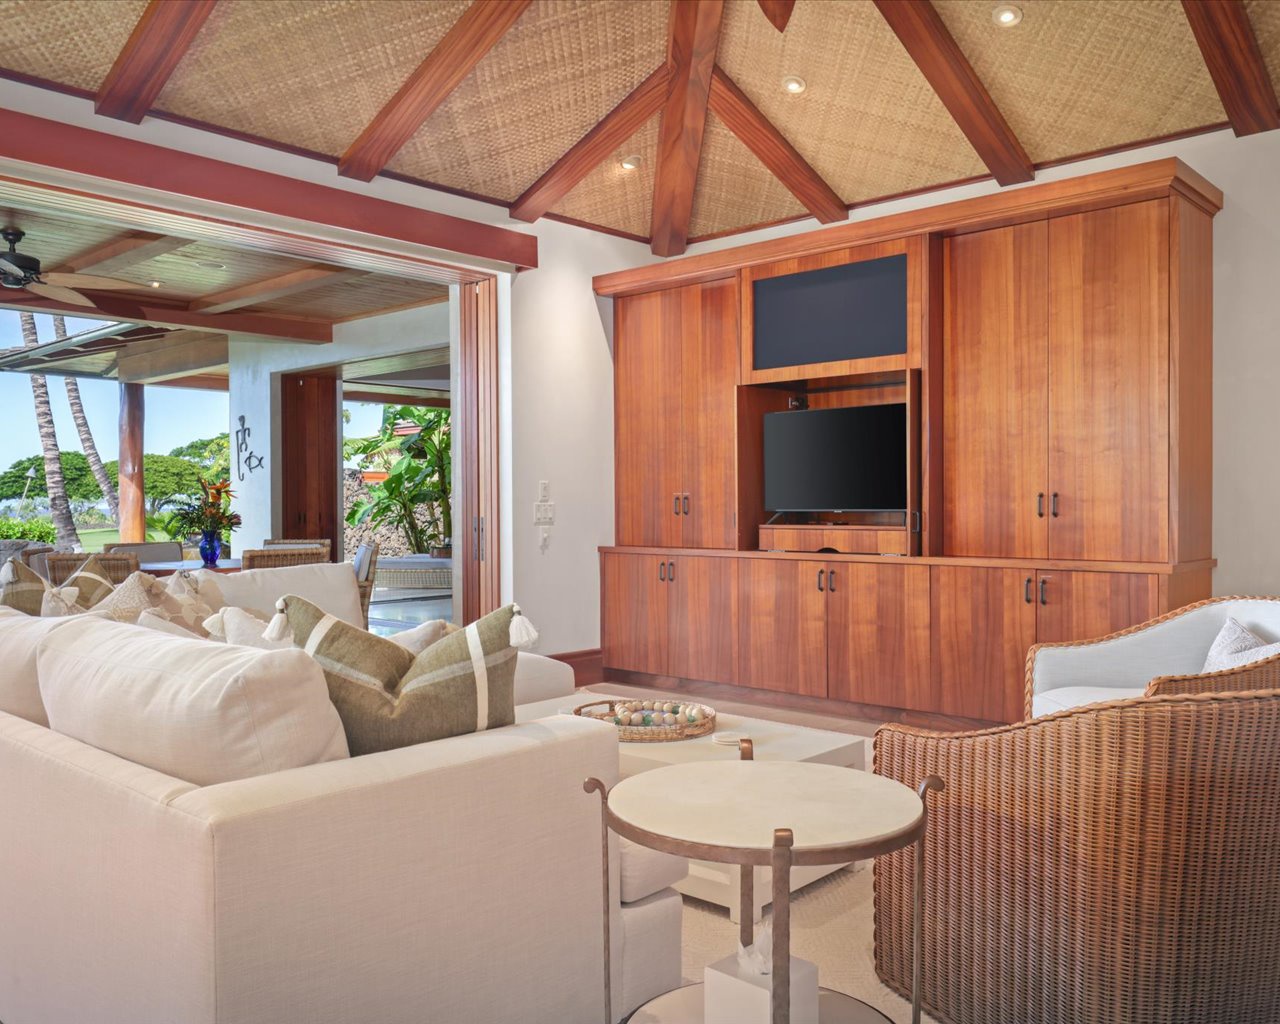 Kailua Kona Vacation Rentals, 3BD Pakui Street (131) Estate Home at Four Seasons Resort at Hualalai - The living room offers a retreat for relaxation with floor to ceiling pocket doors to the lanai